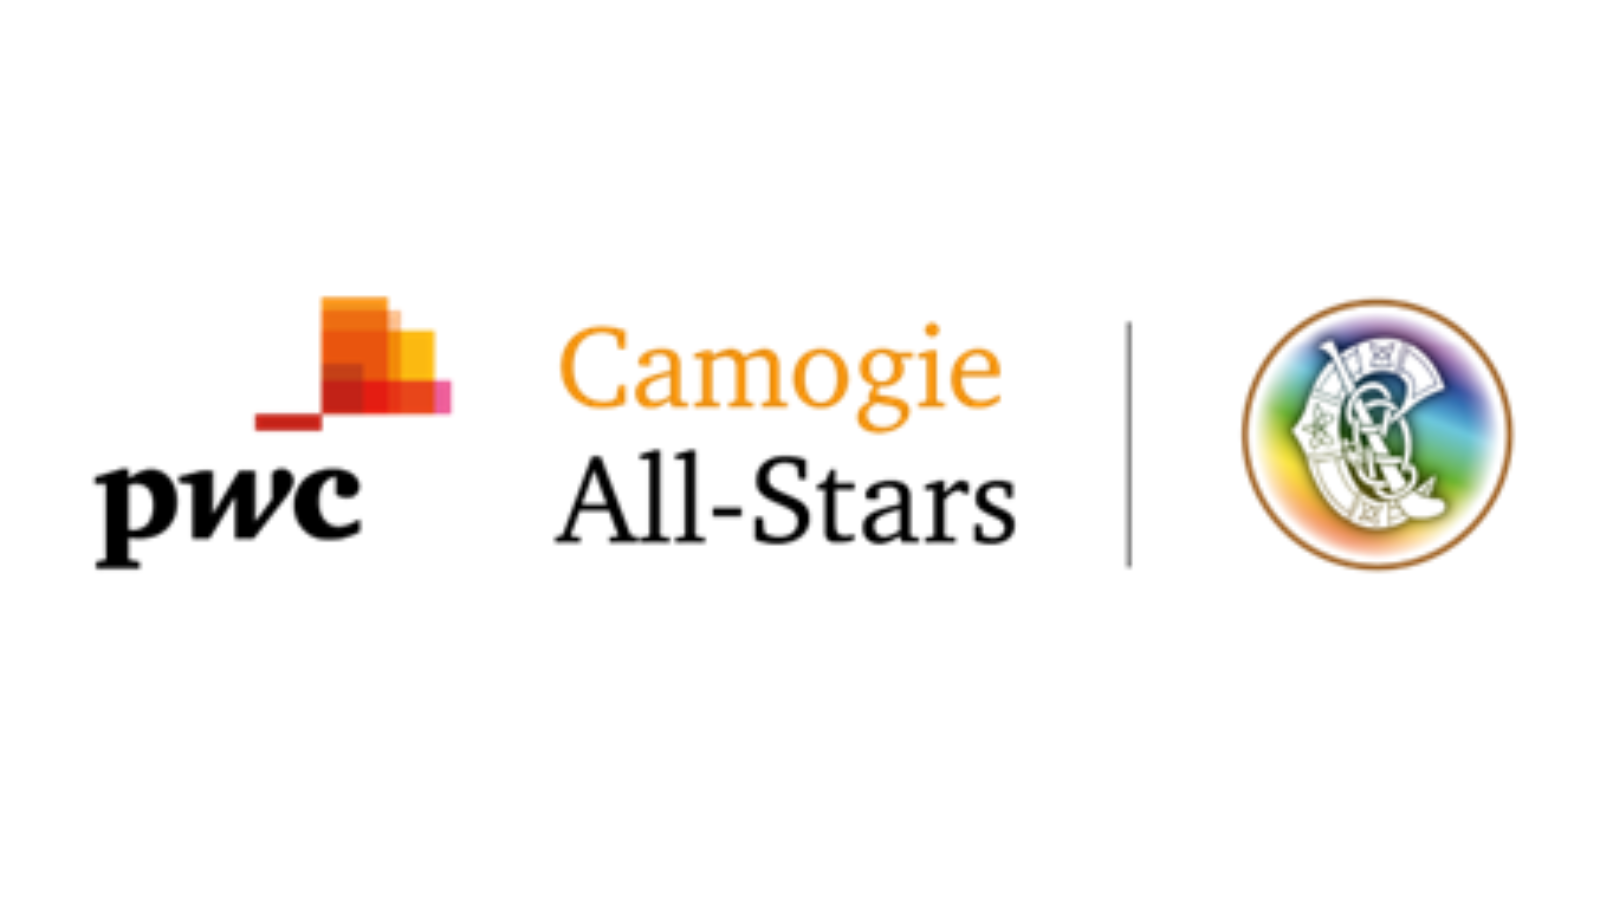 2022 PwC Camogie All-Stars Nominees announced.